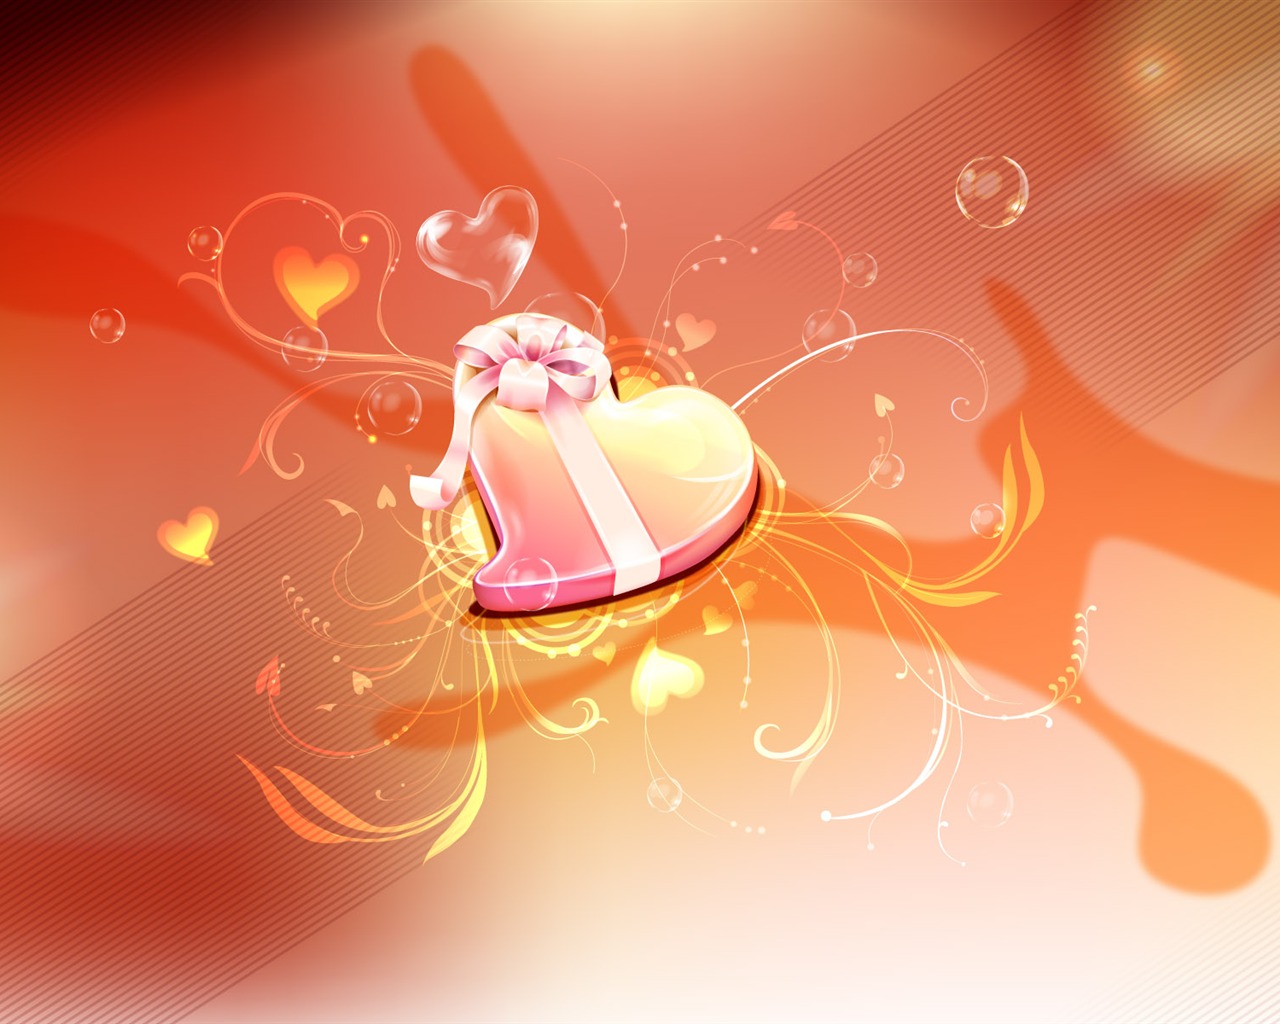 Valentine's Day Love Theme Wallpapers (2) #11 - 1280x1024